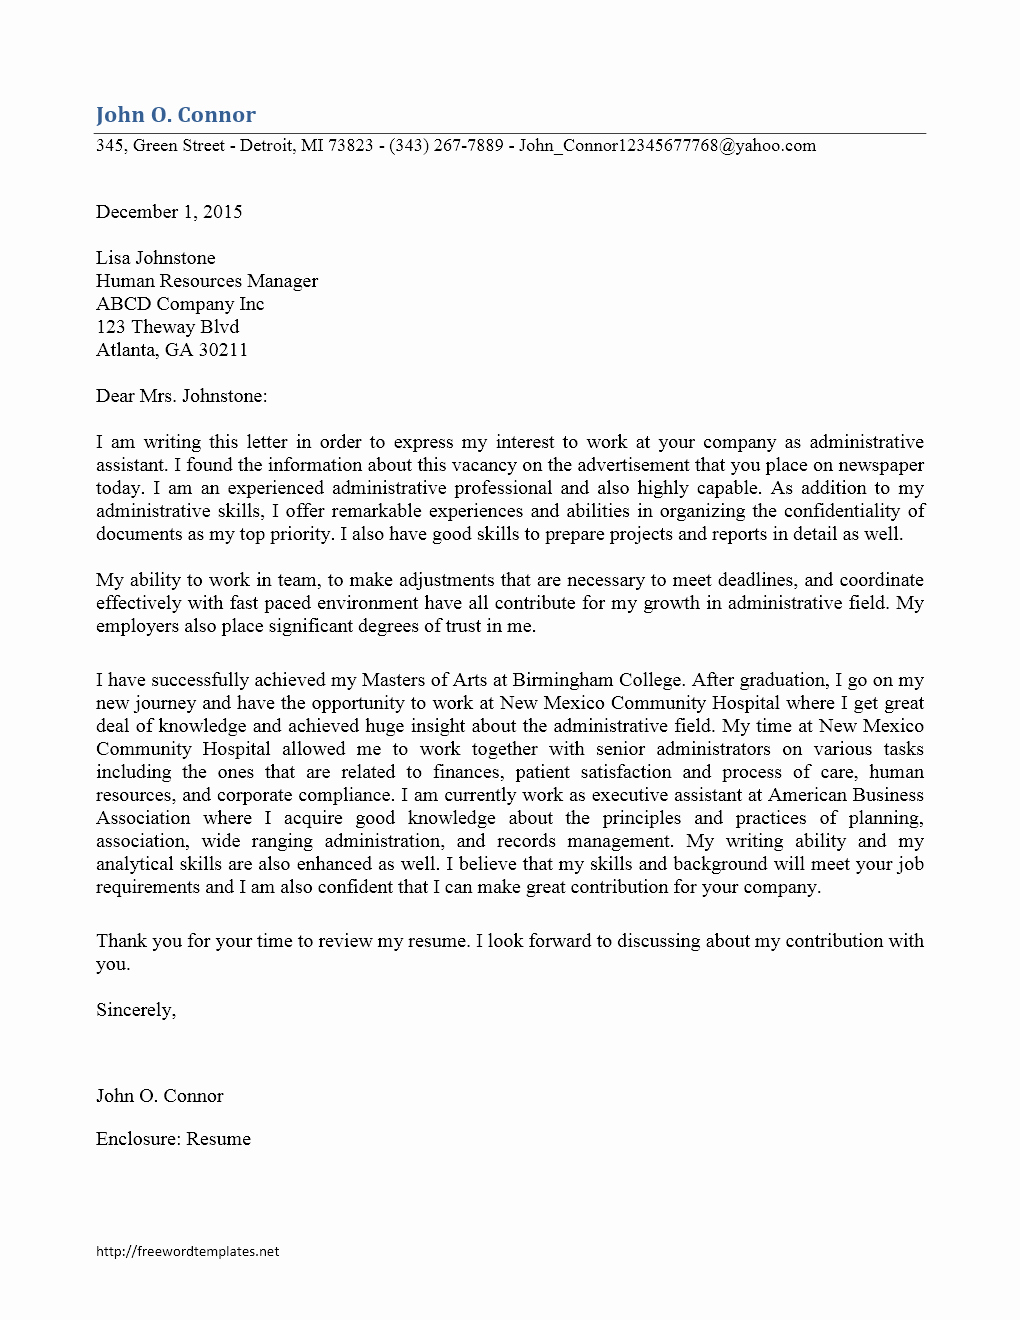 Cover Letter for Clerical Position Best Of Cover Letter Examples for Administrative Clerical